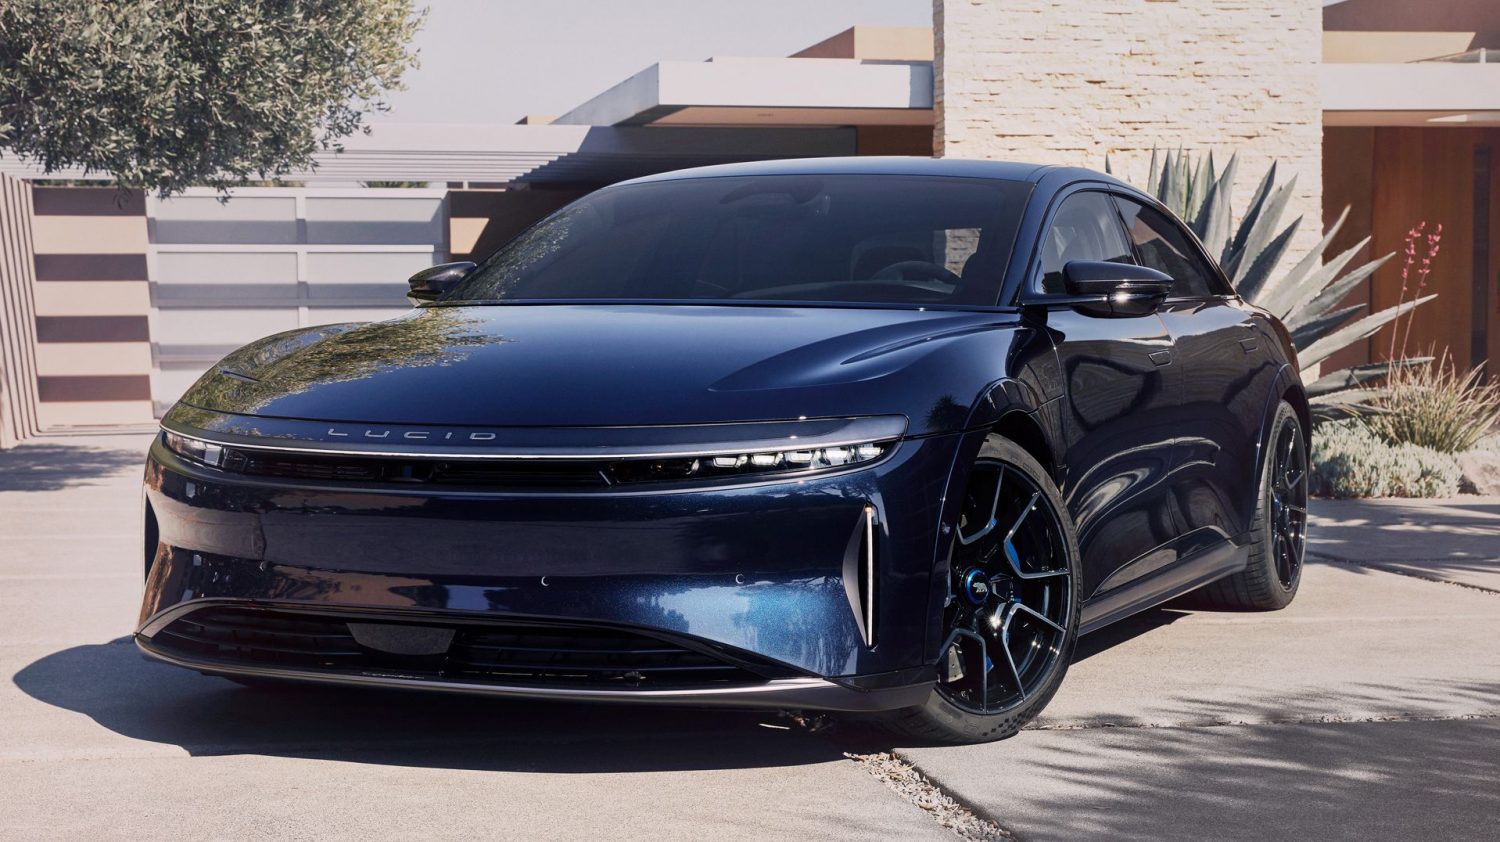 Lucid unveiled a new Air Pure sedan with rear-wheel drive (RWD), completing Lucids portfolio of its flagship EV and offering more trim options